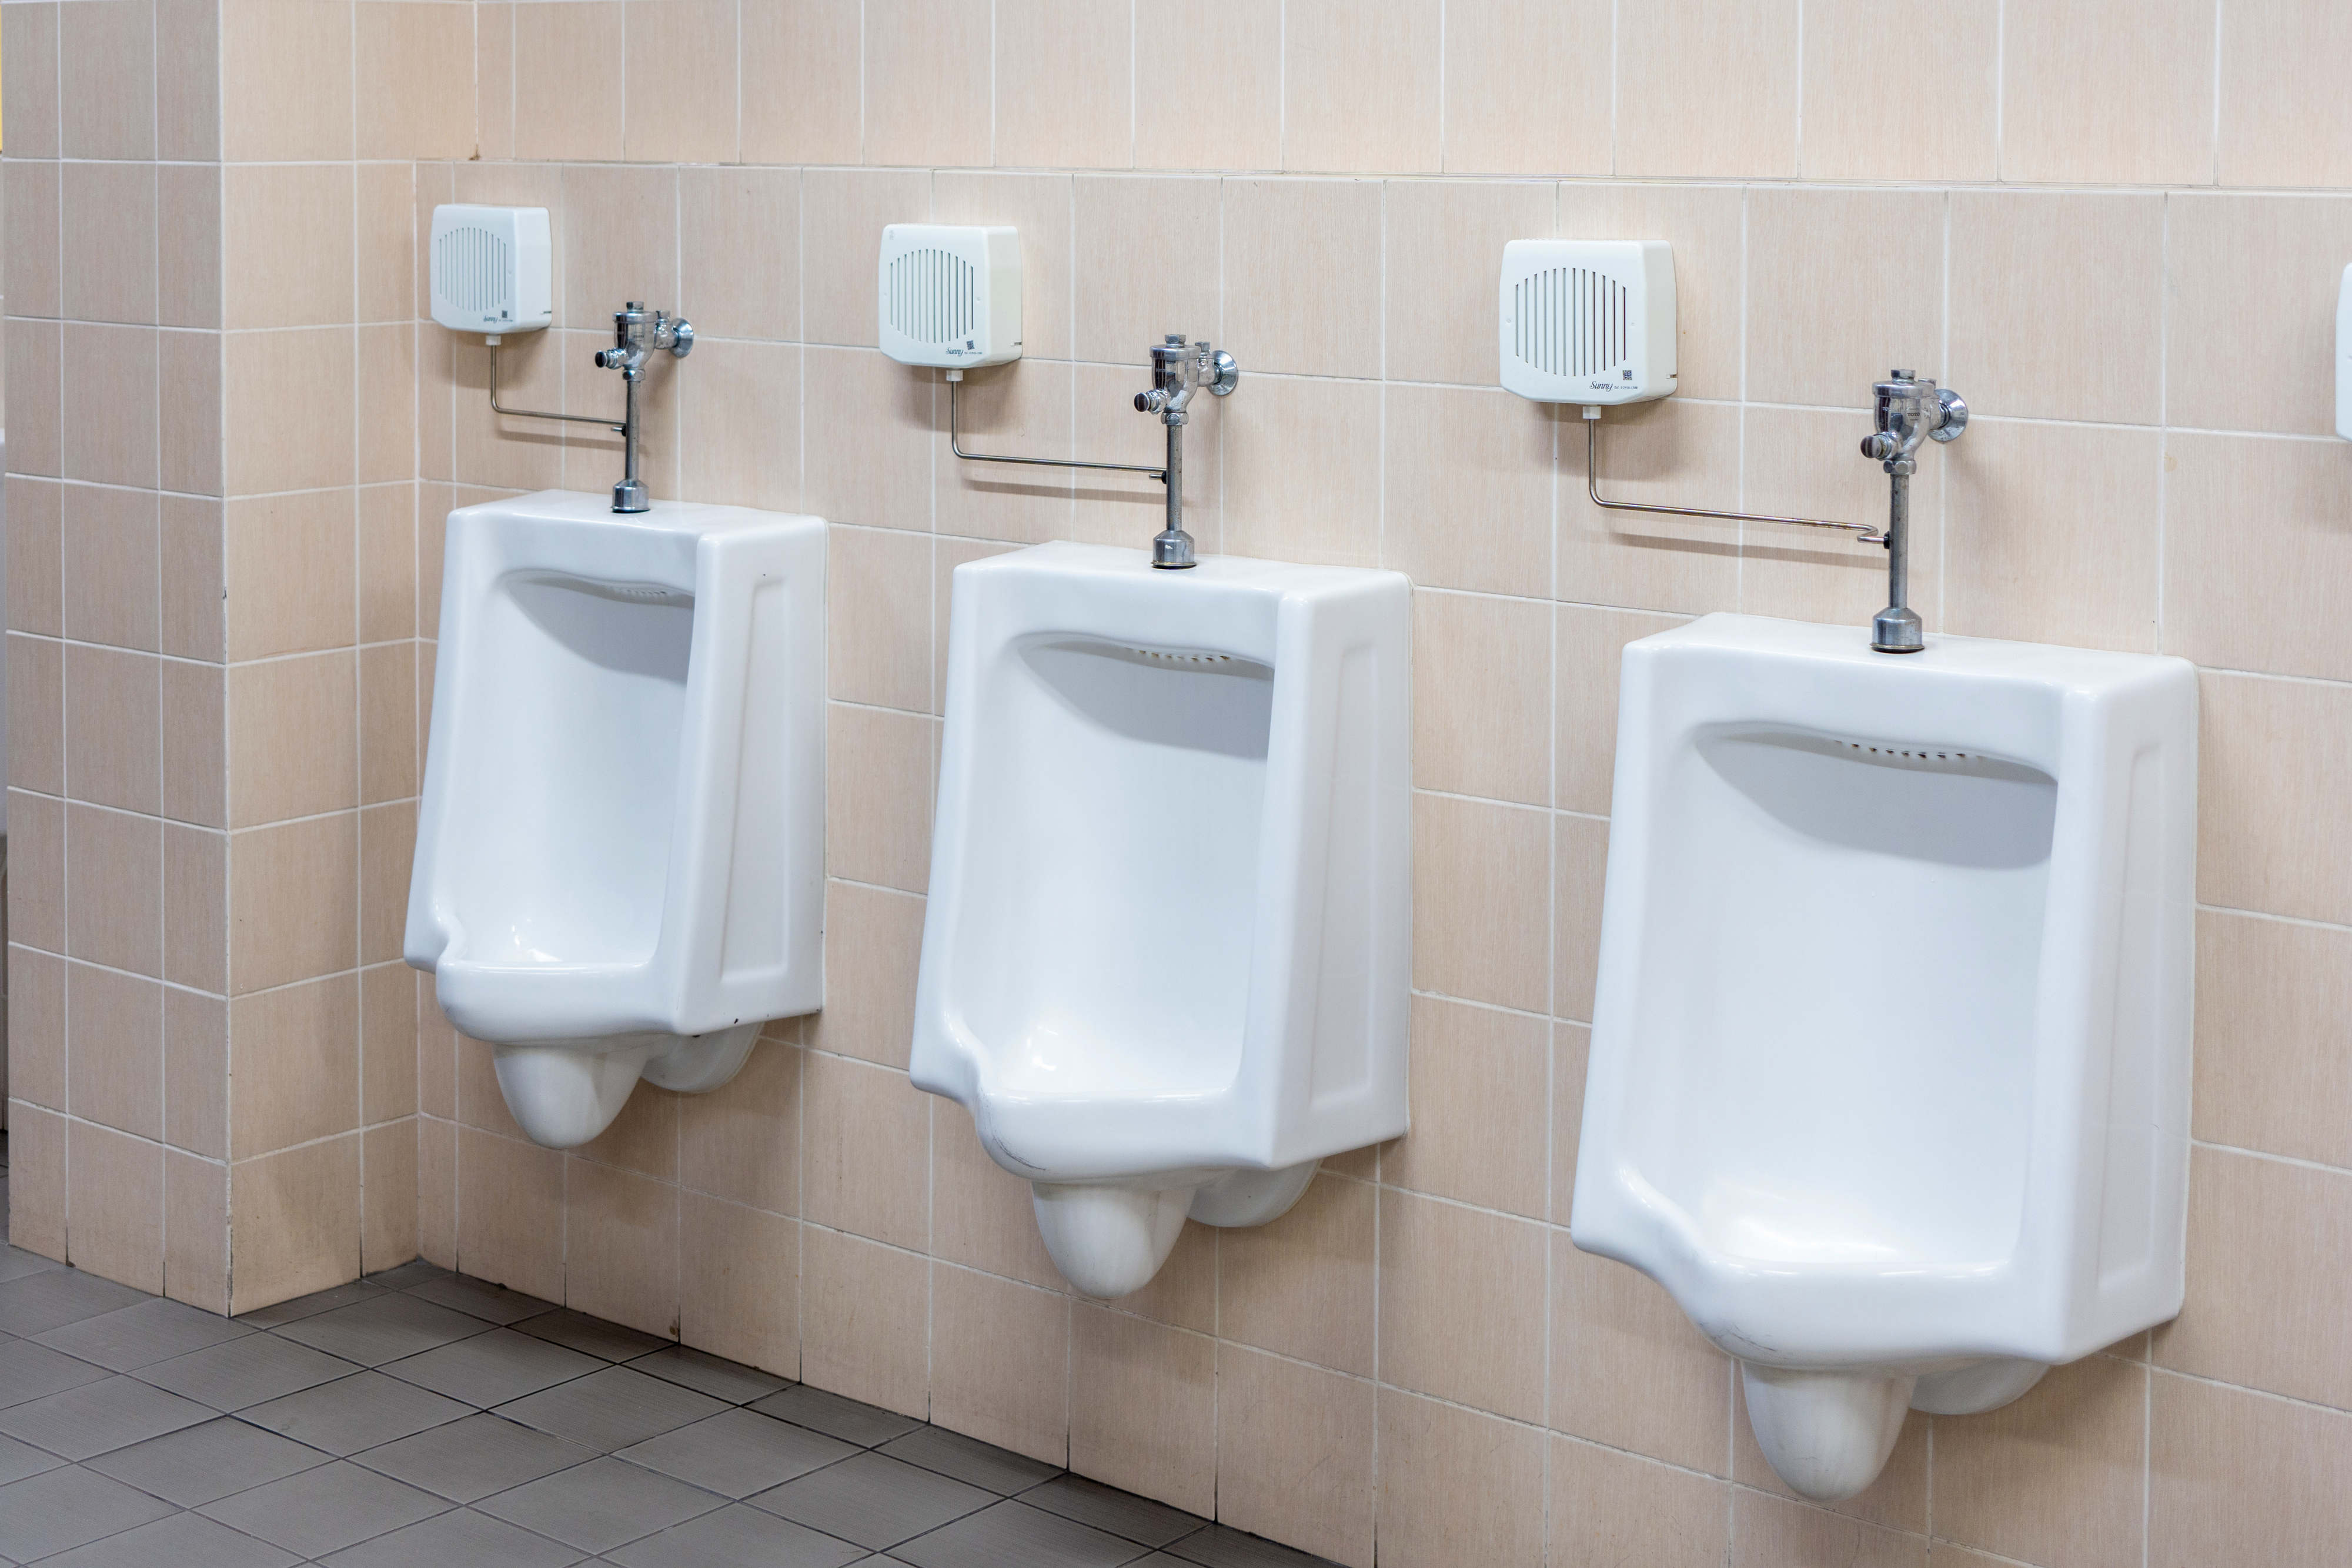 Three urinals mounted on a tiled wall in a restroom